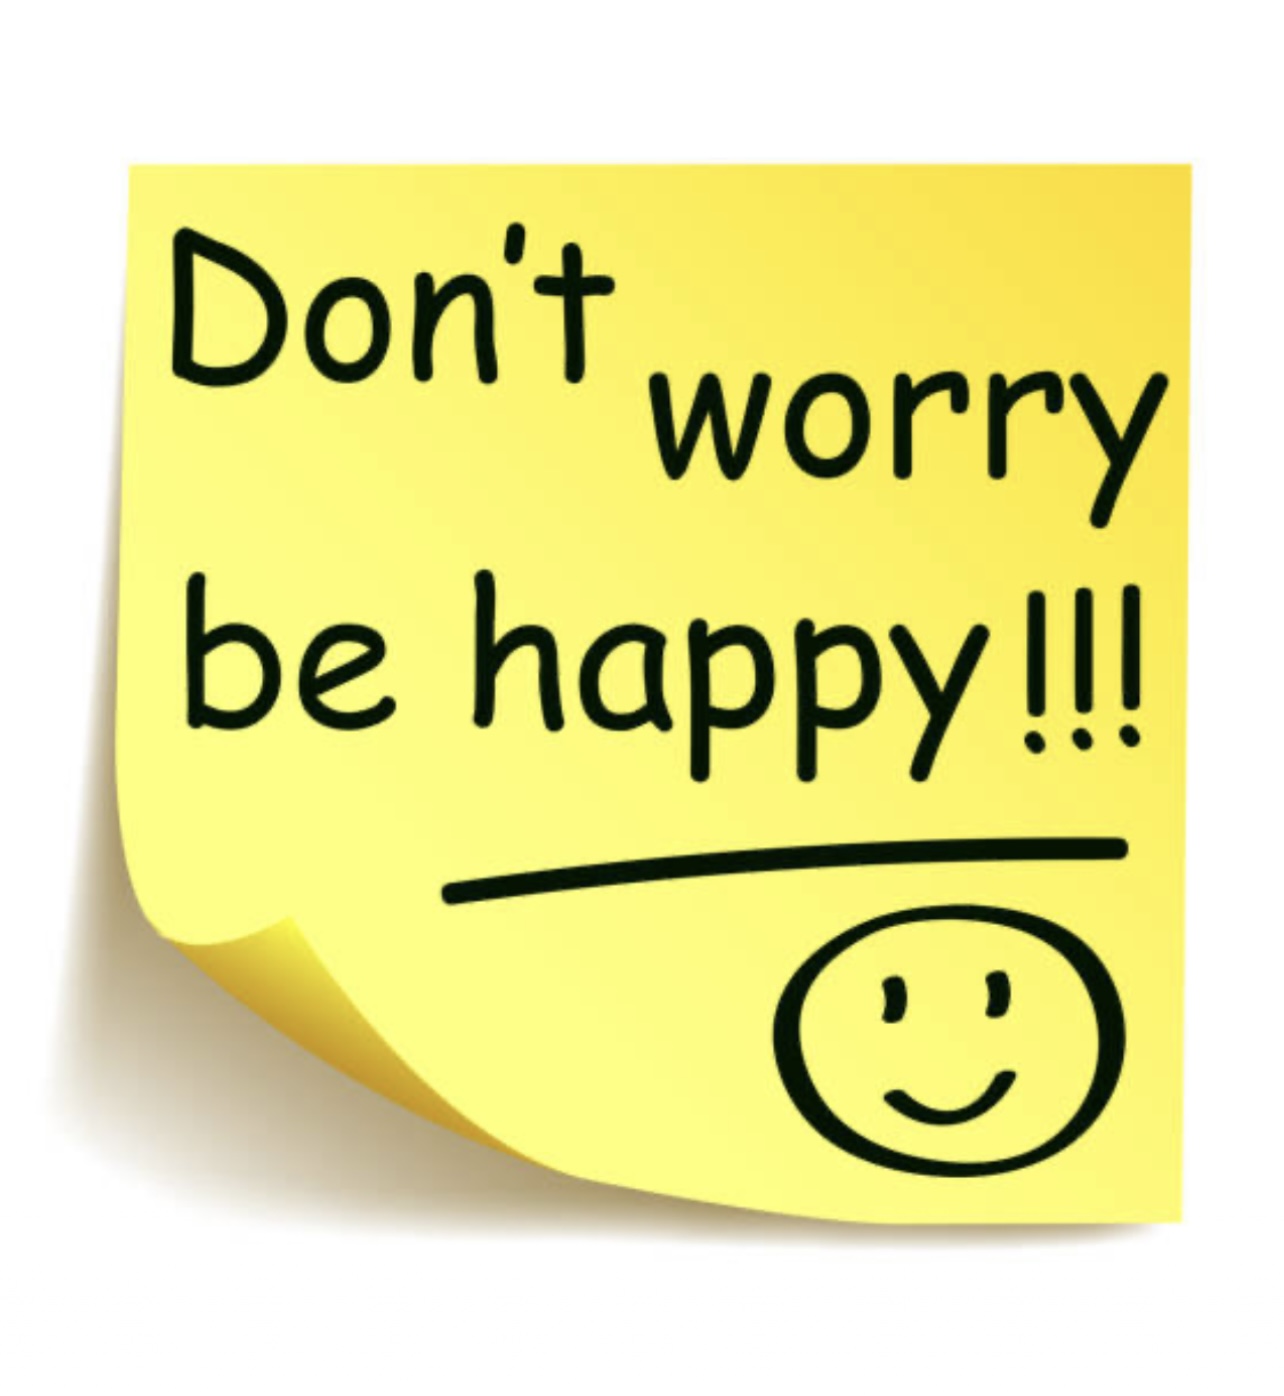 Don't worry be happy quote on sticky note. How to be happy.